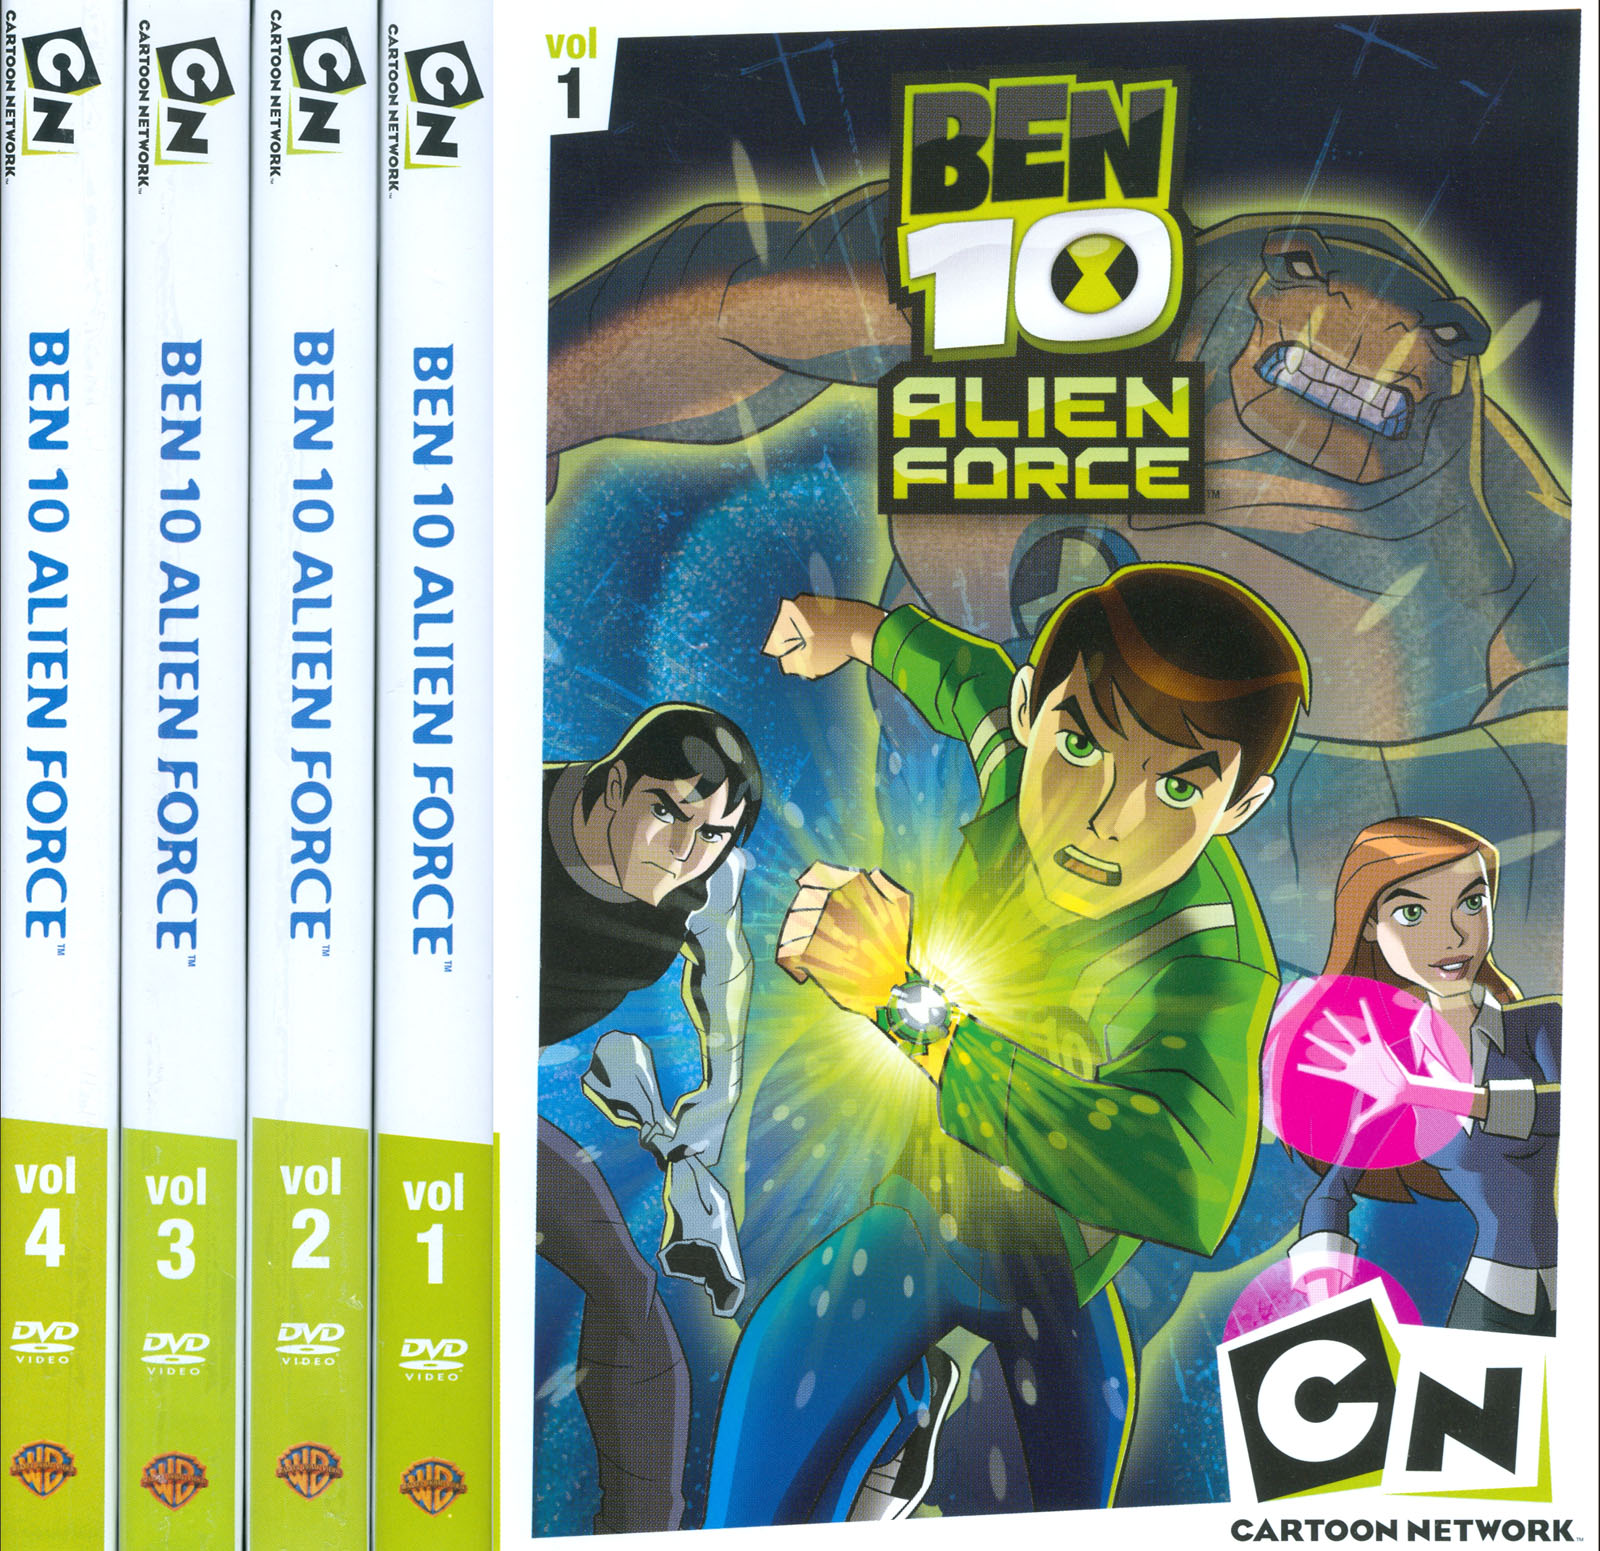 Pre-air Promo DVD of the first episode of Alien Force : r/Ben10